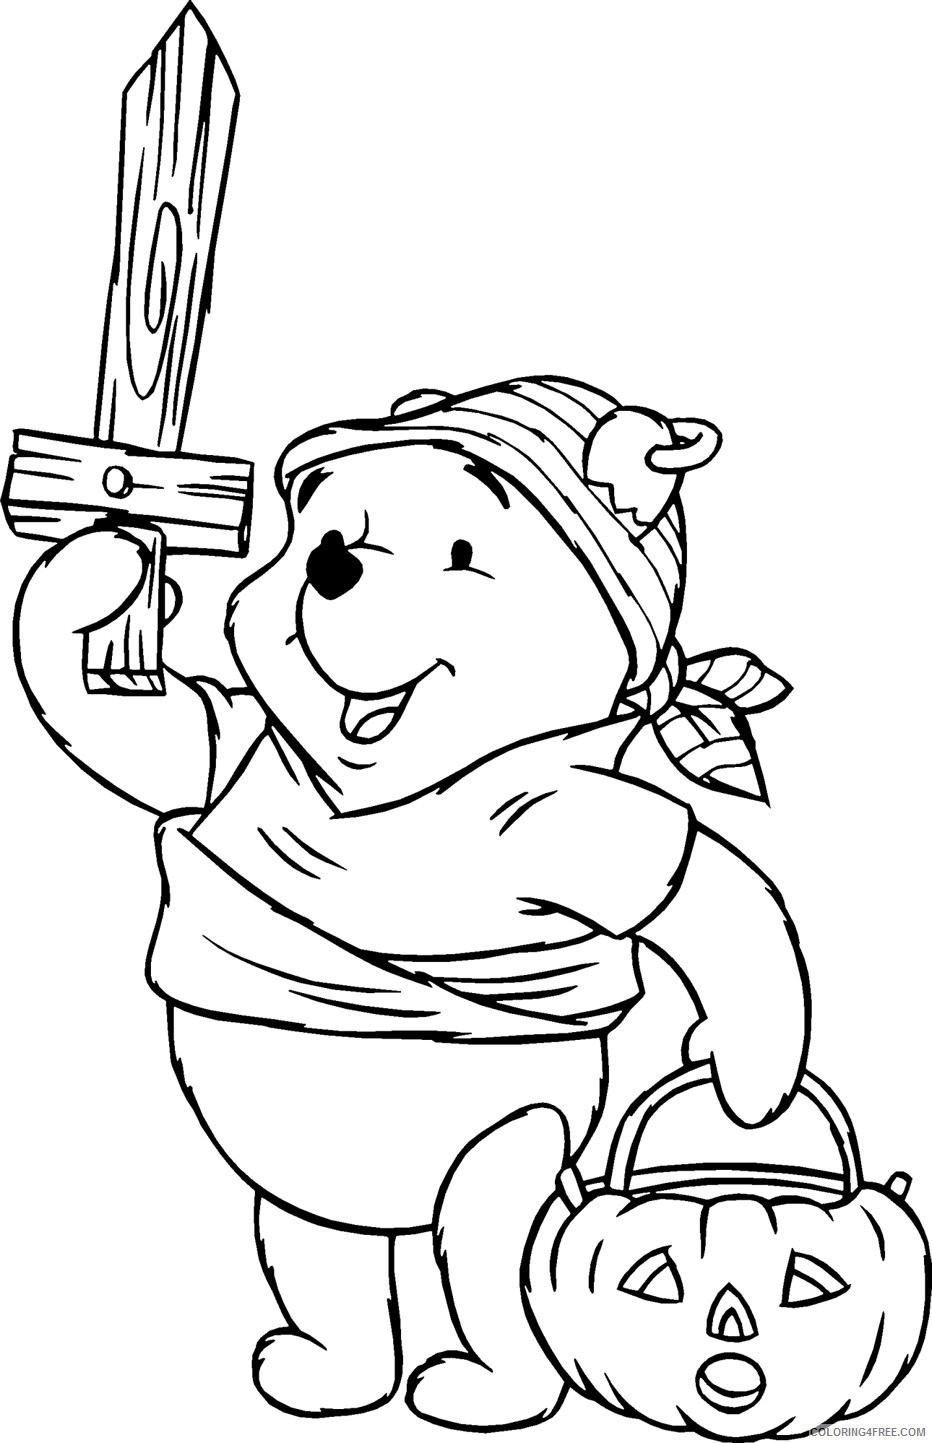 Winnie the Pooh Coloring Pages Cartoons Pooh Bear Disney Halloween Printable 2020 6992 Coloring4free